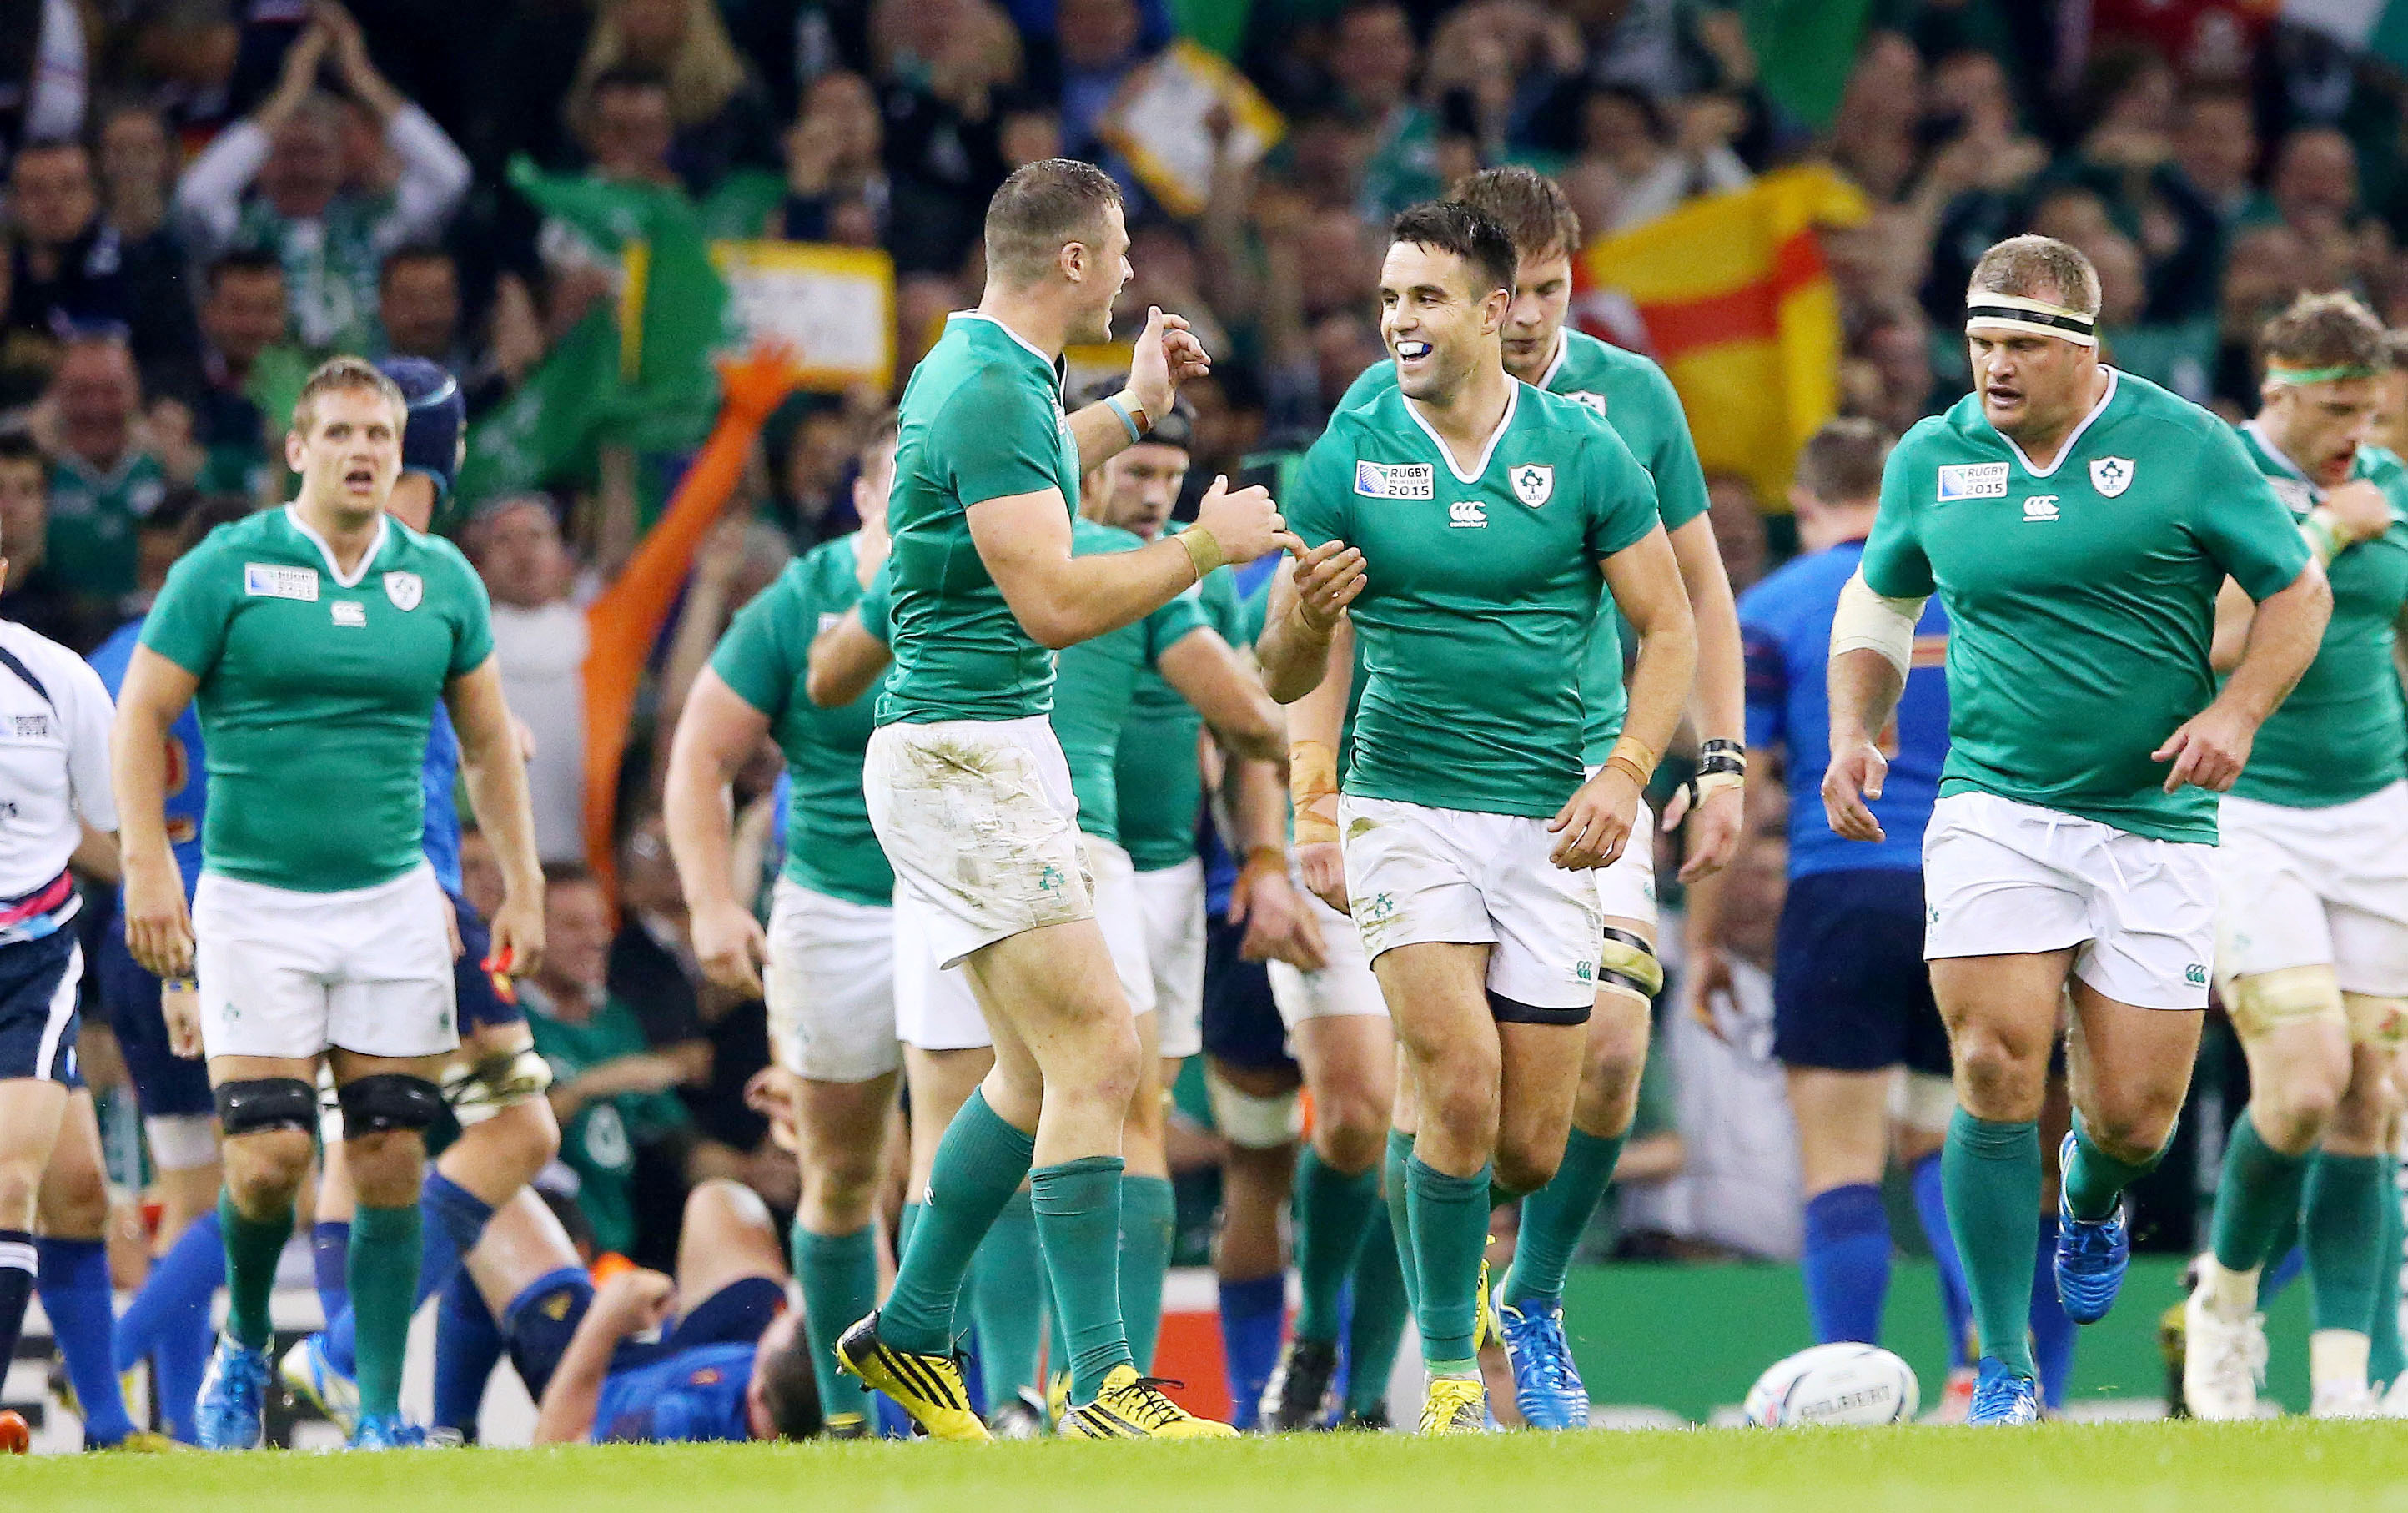 SEMI-FINAL PLACE BECKONS: Conor Murray celebrates his try against France on Sunday and the injury-hit Ireland team face Argentina on Sunday (1pm) as they seek a last four spot.